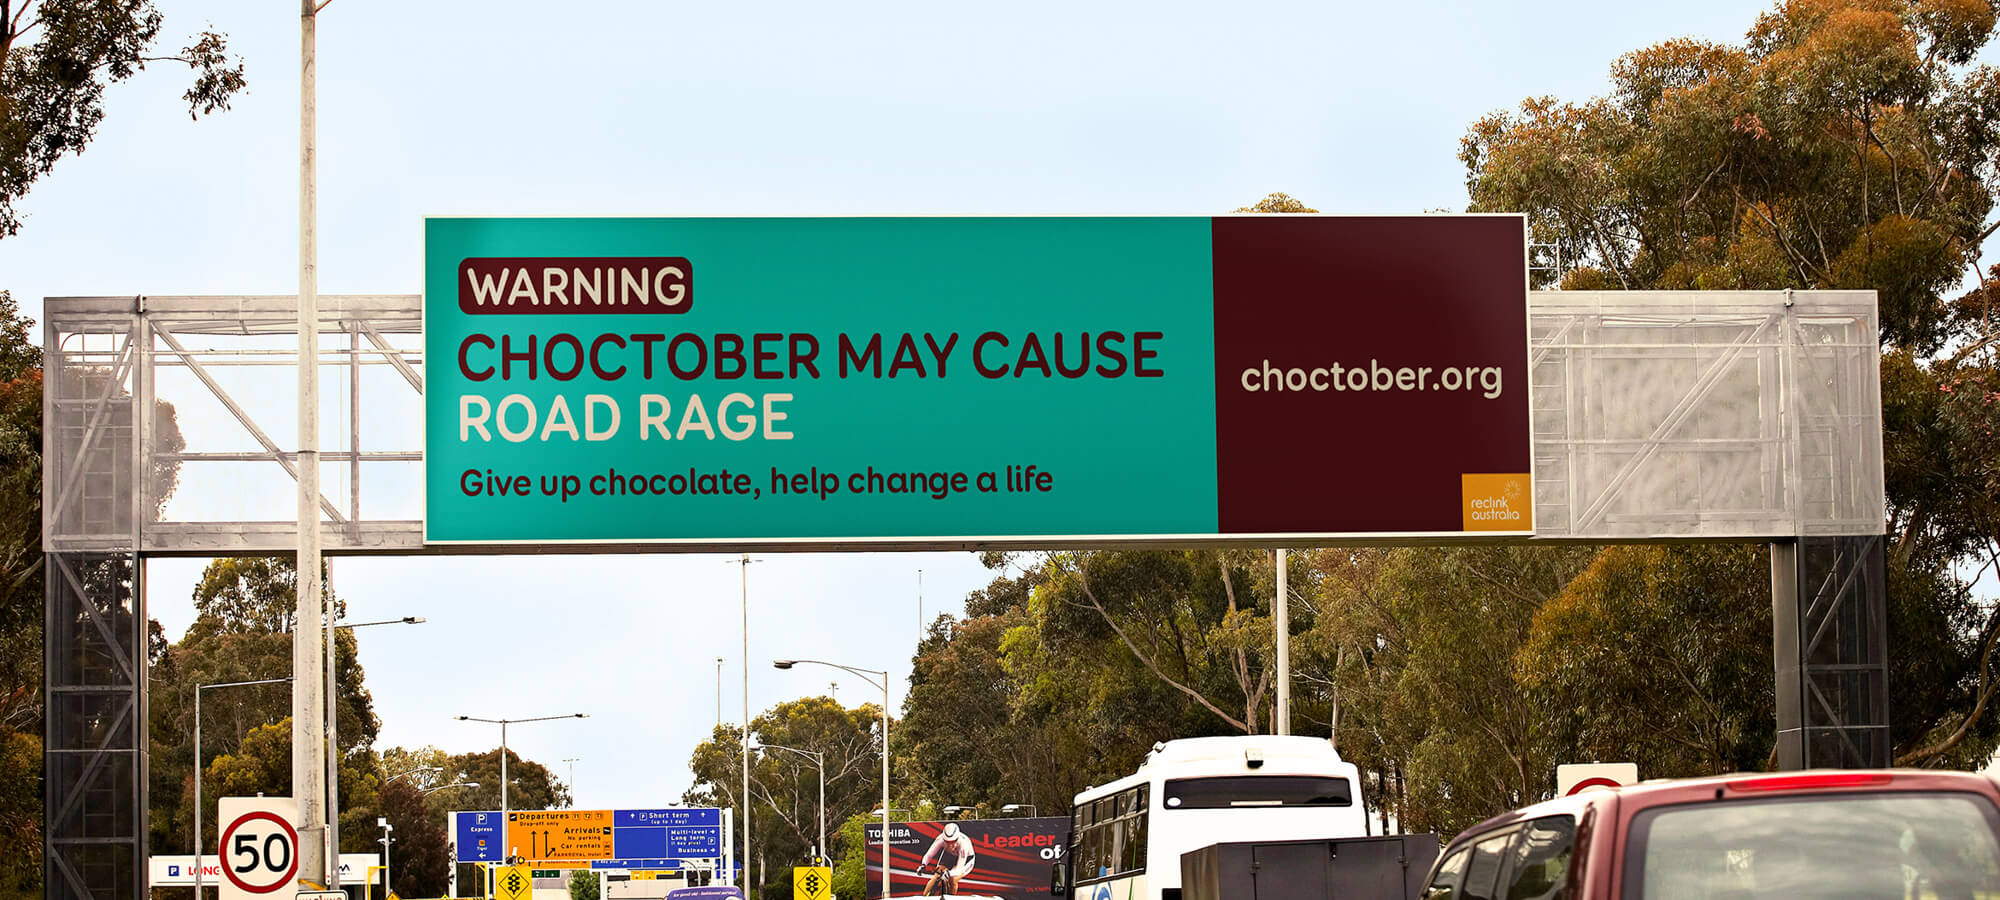 Reclink Choctober billboard warning may cause road rage give up chocolate, help change a life